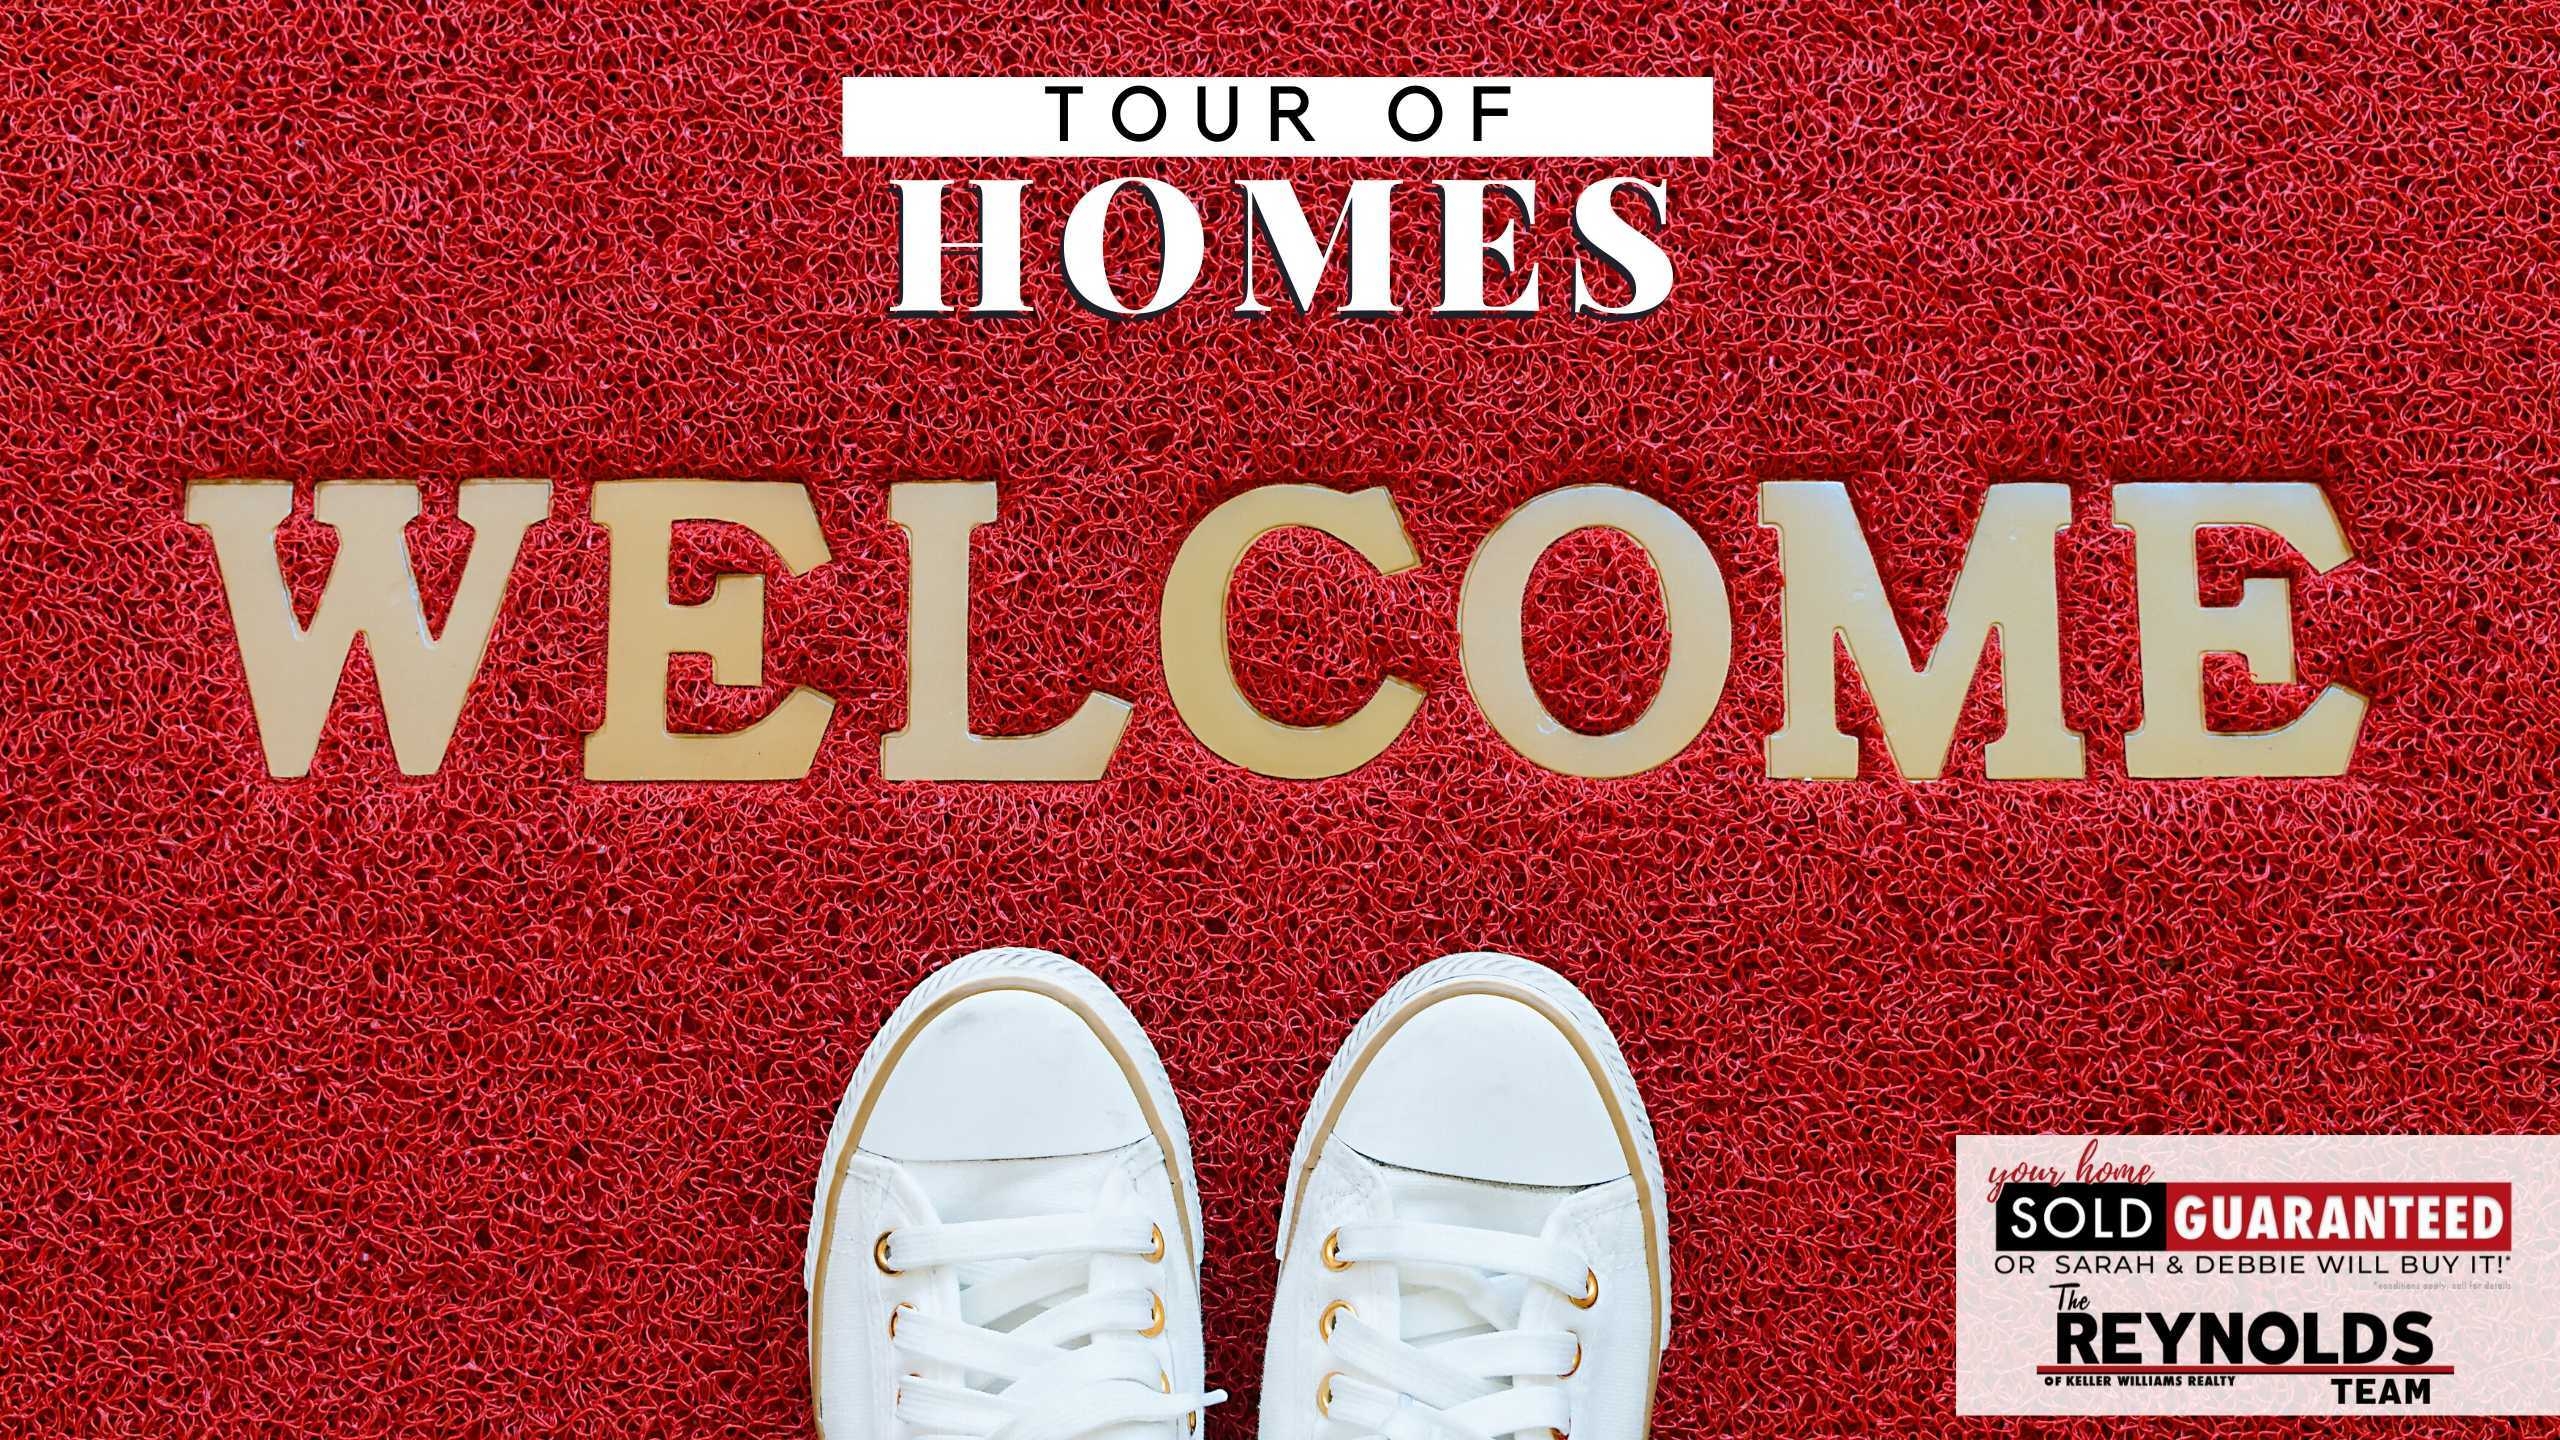 Tour of Homes June 13th to 14th